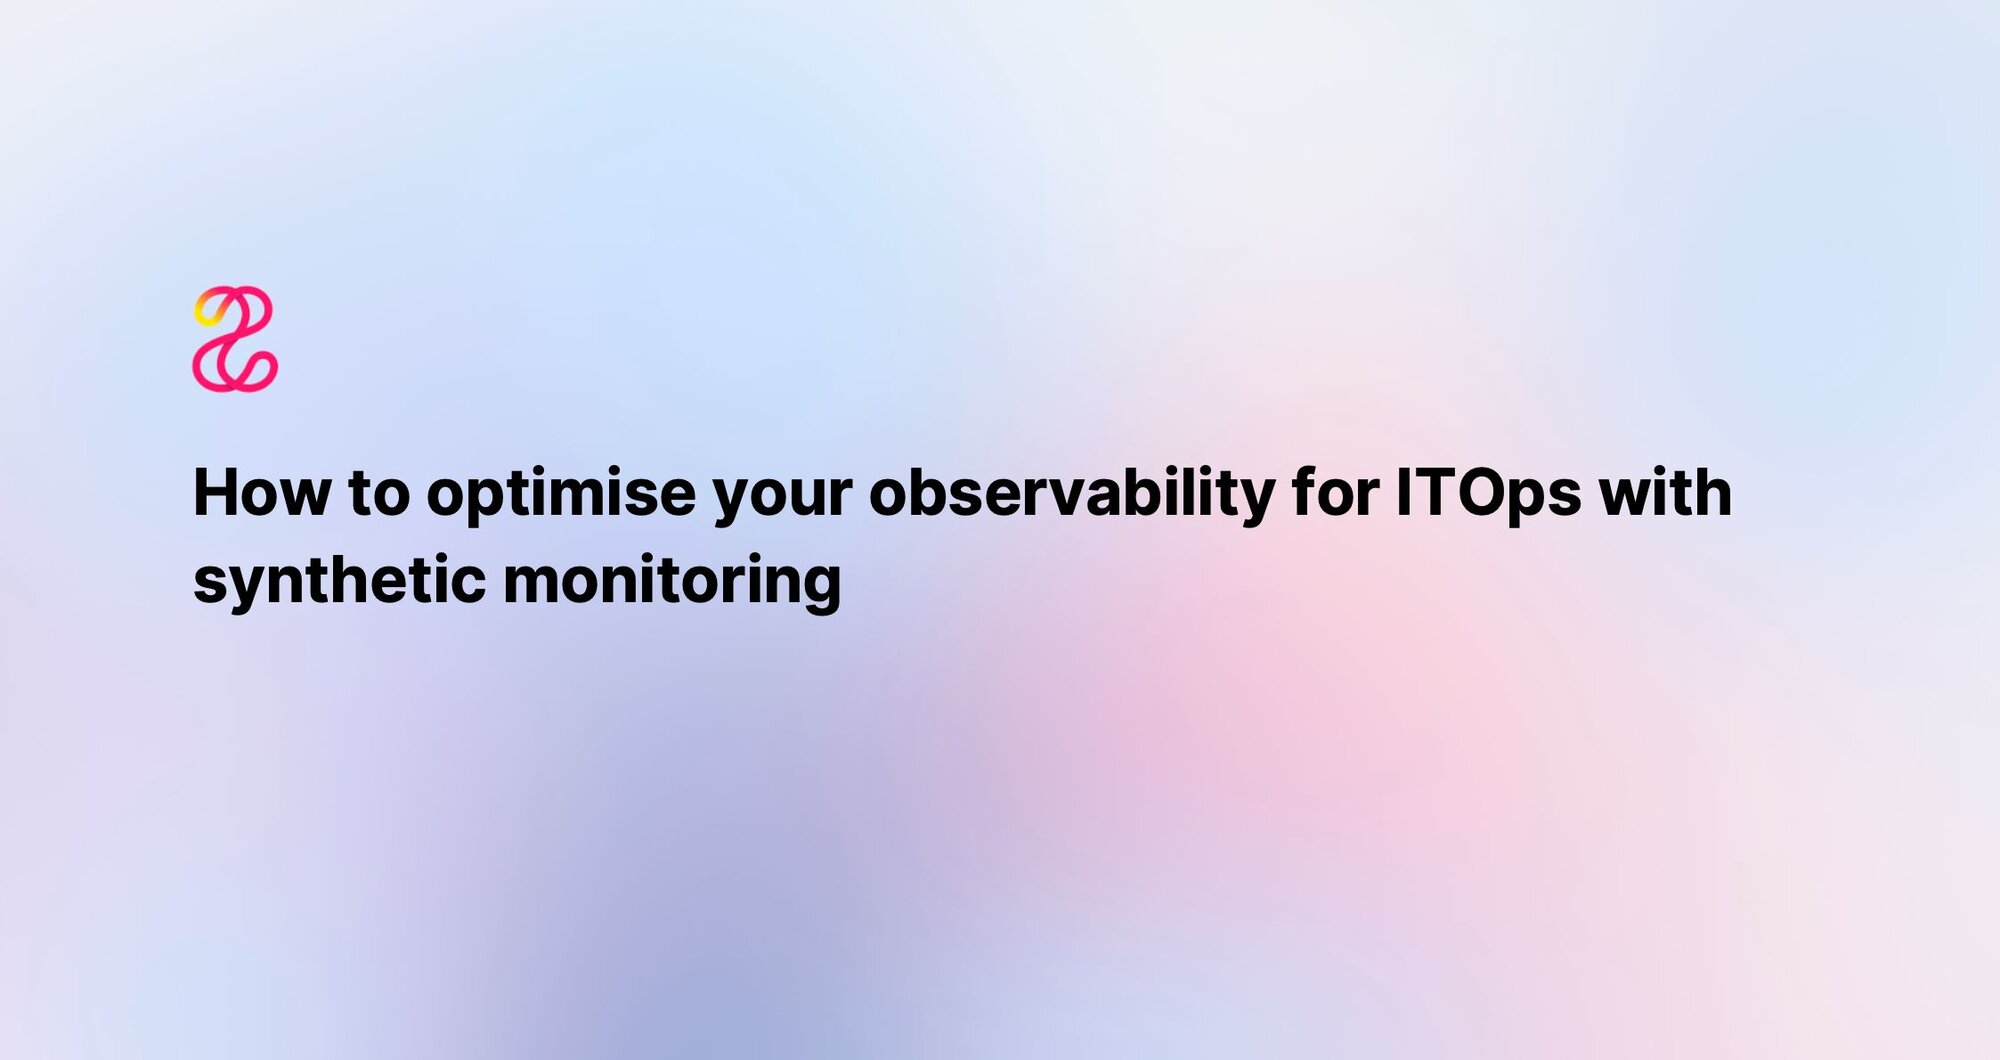 How to Optimise your Observability for ITOps with Synthetic Monitoring  